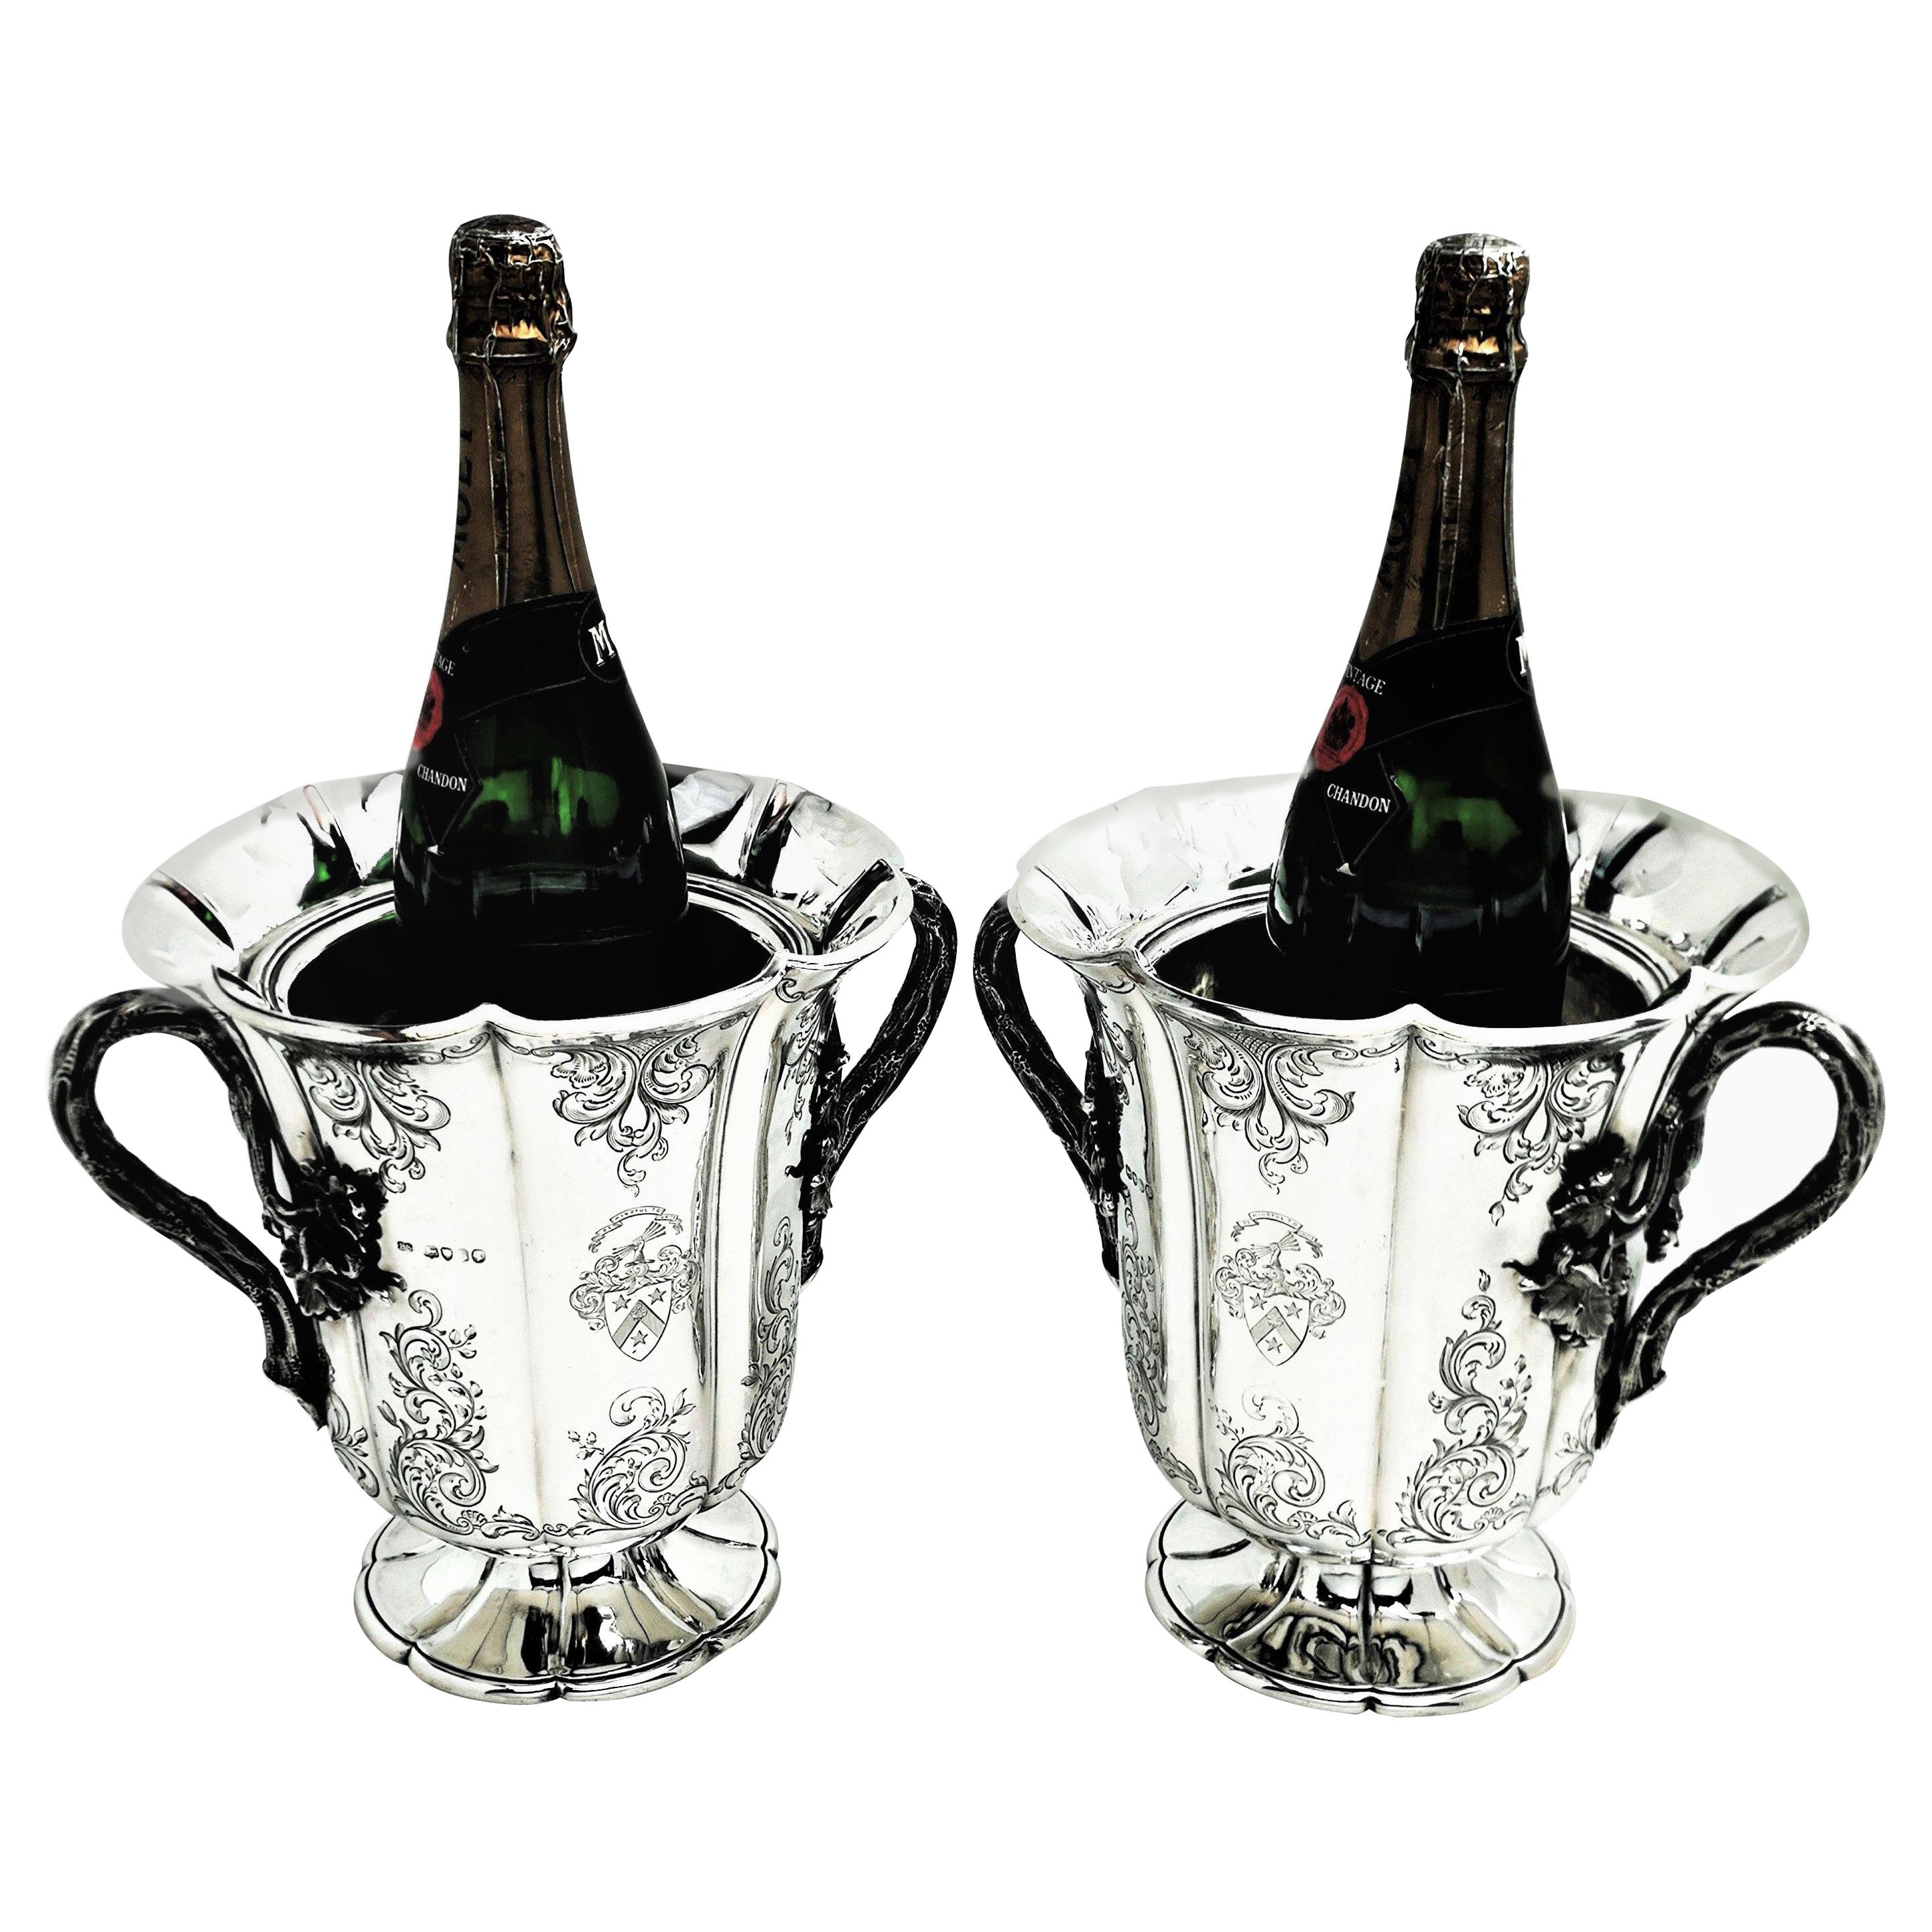 Pair of Antique Victorian Sterling Silver Wine Coolers / Champagne Buckets, 1844